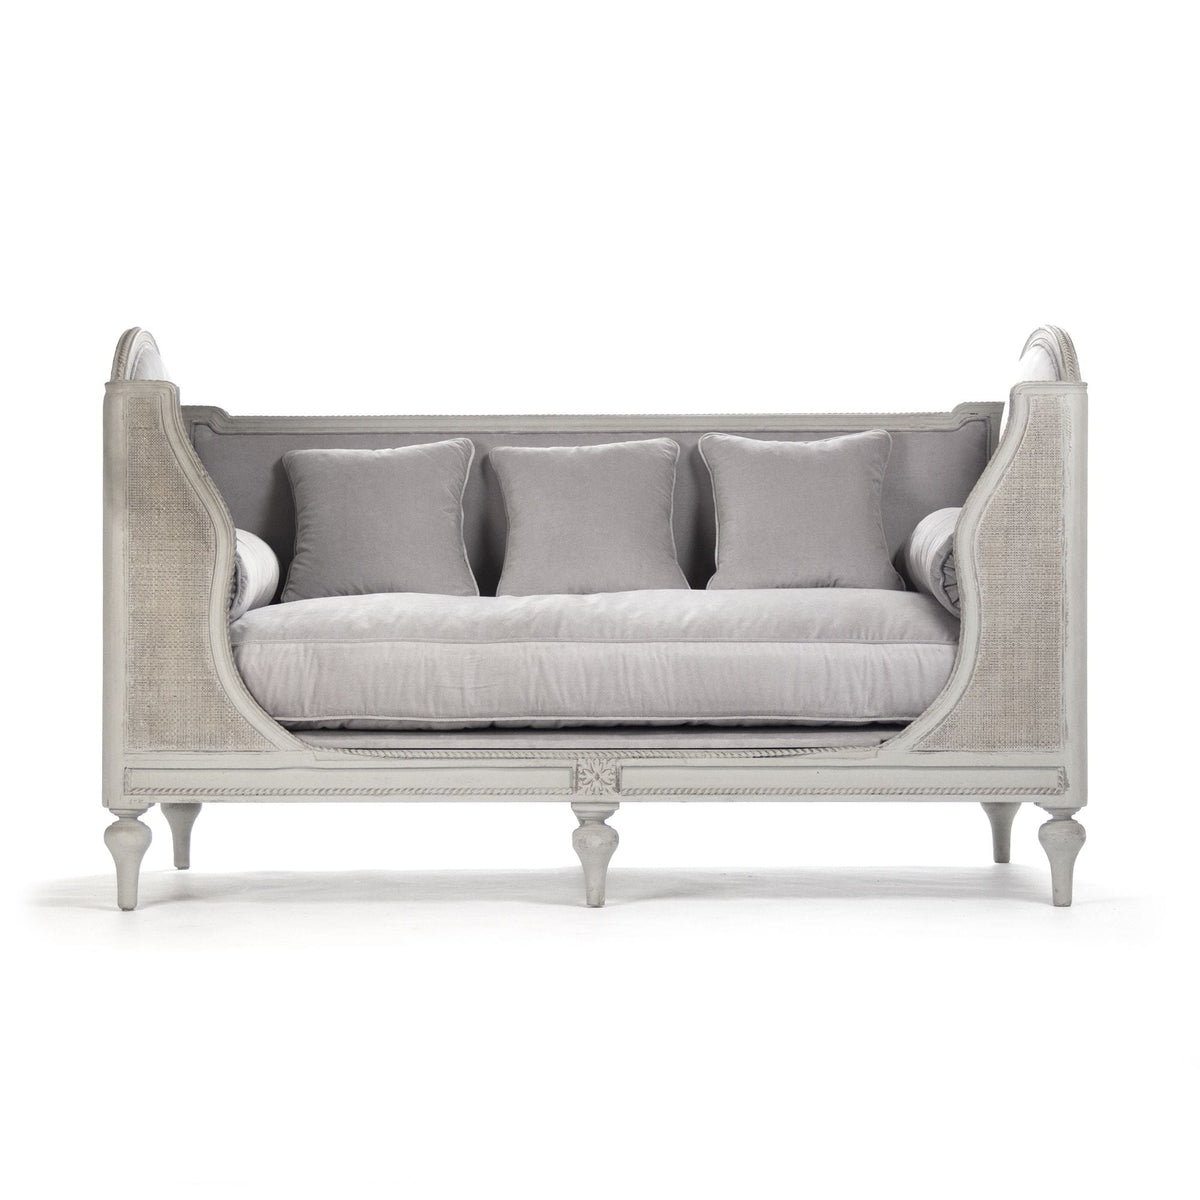 Winni Daybed by Zentique